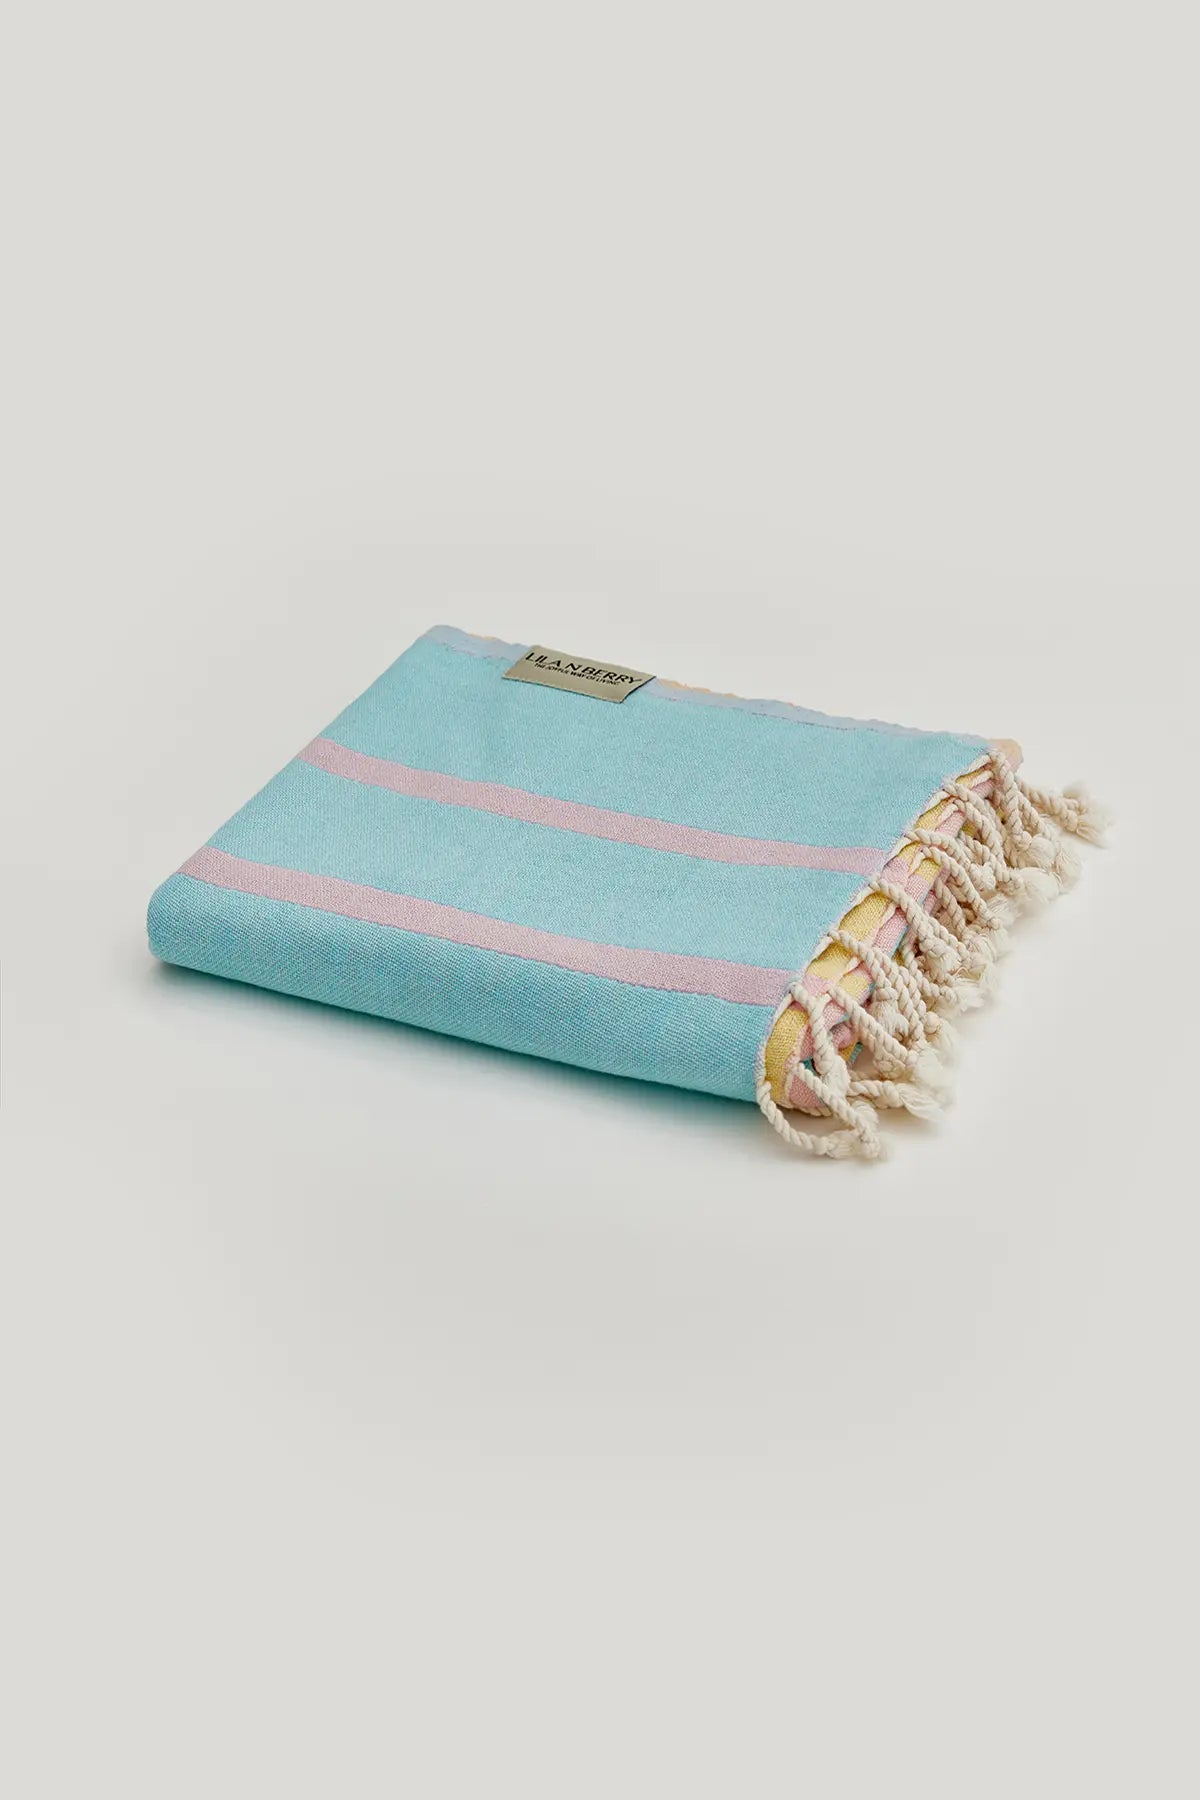 Beach/Bath,Pink-Blue,Turkish towel, folded,summer,line patterned,double-faces,purified sand,light,compact, easy pack,fun, recycled,double color